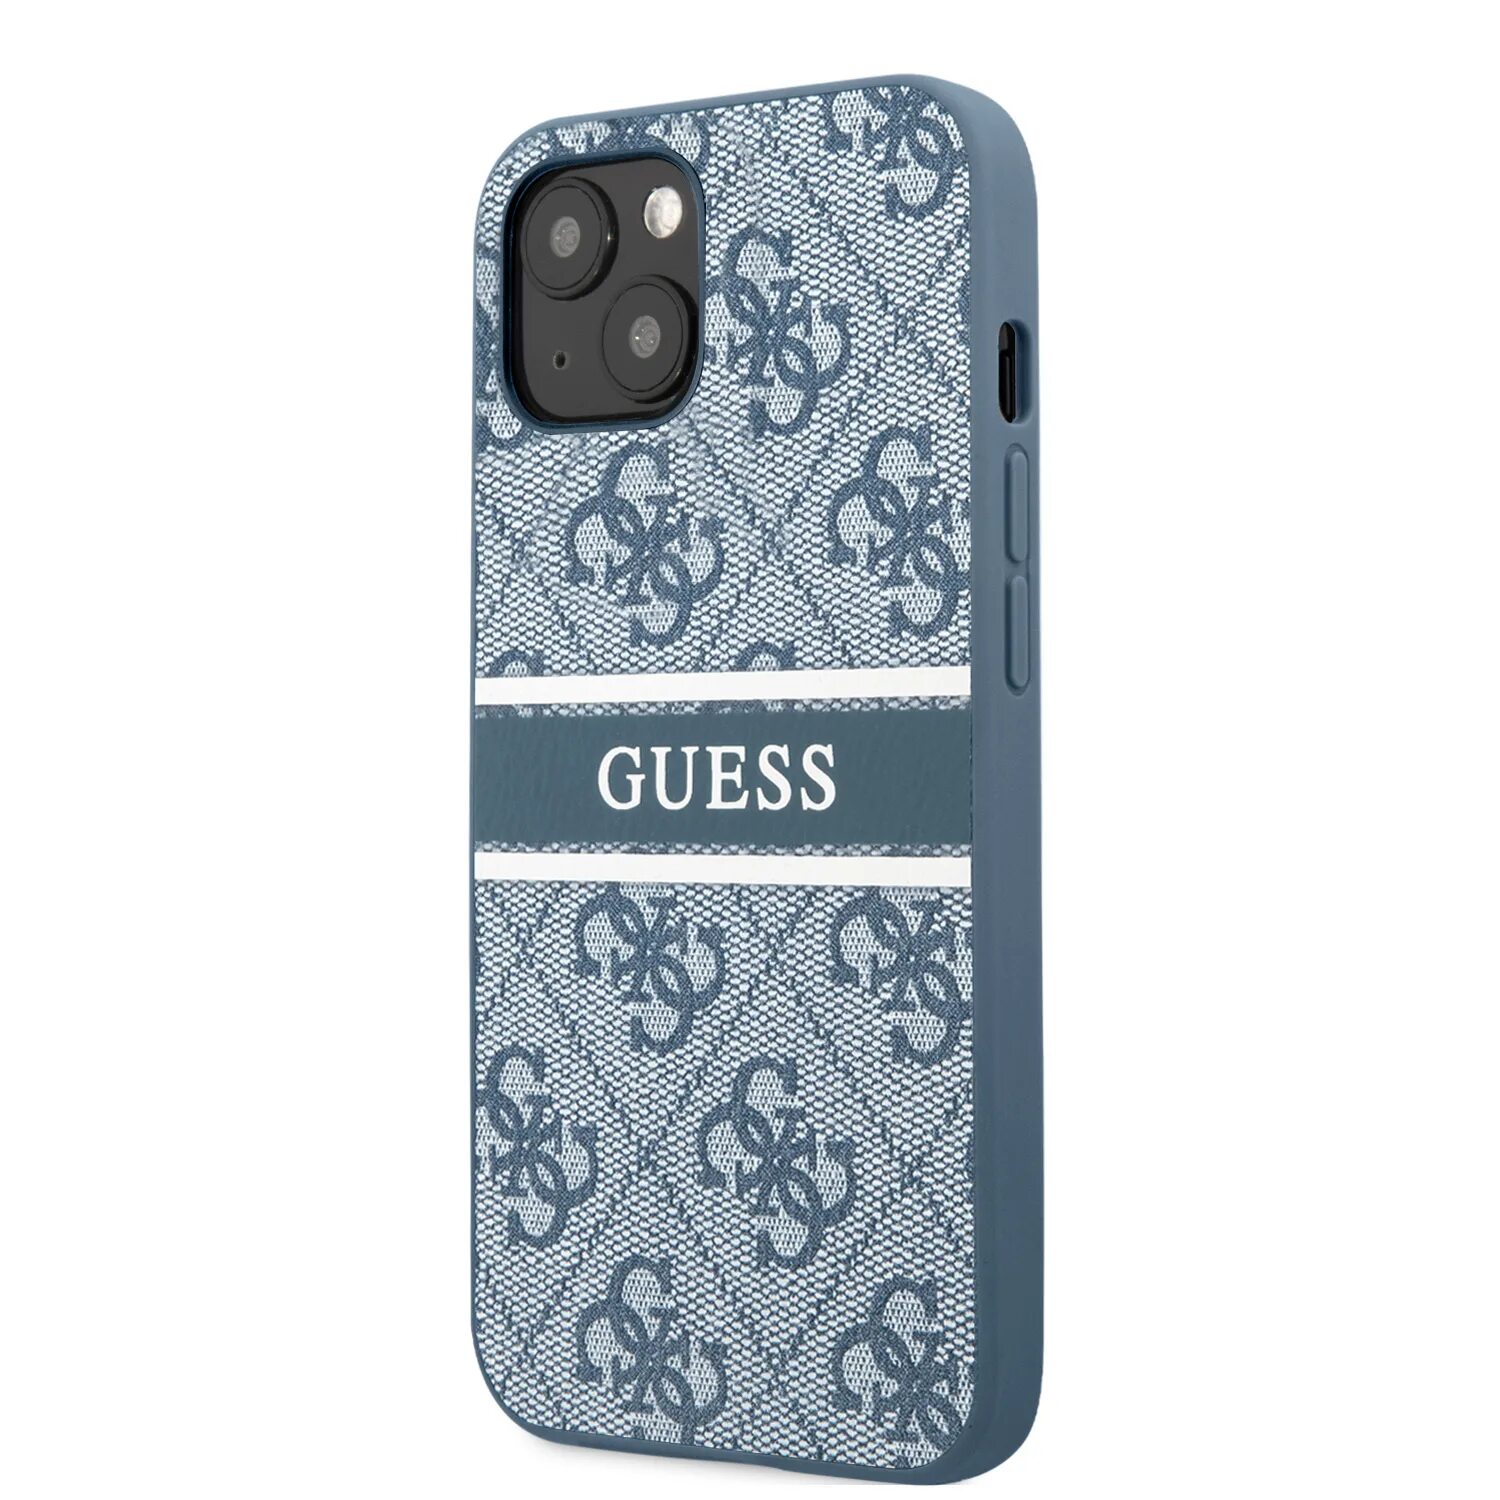 Guess iphone 15 pro. Чехол guess для iphone 13 Pro. Чехол guess 13 Pro Max. Чехол на айфон 13 про Макс guess. Iphone 13 Pro Max guess Case.